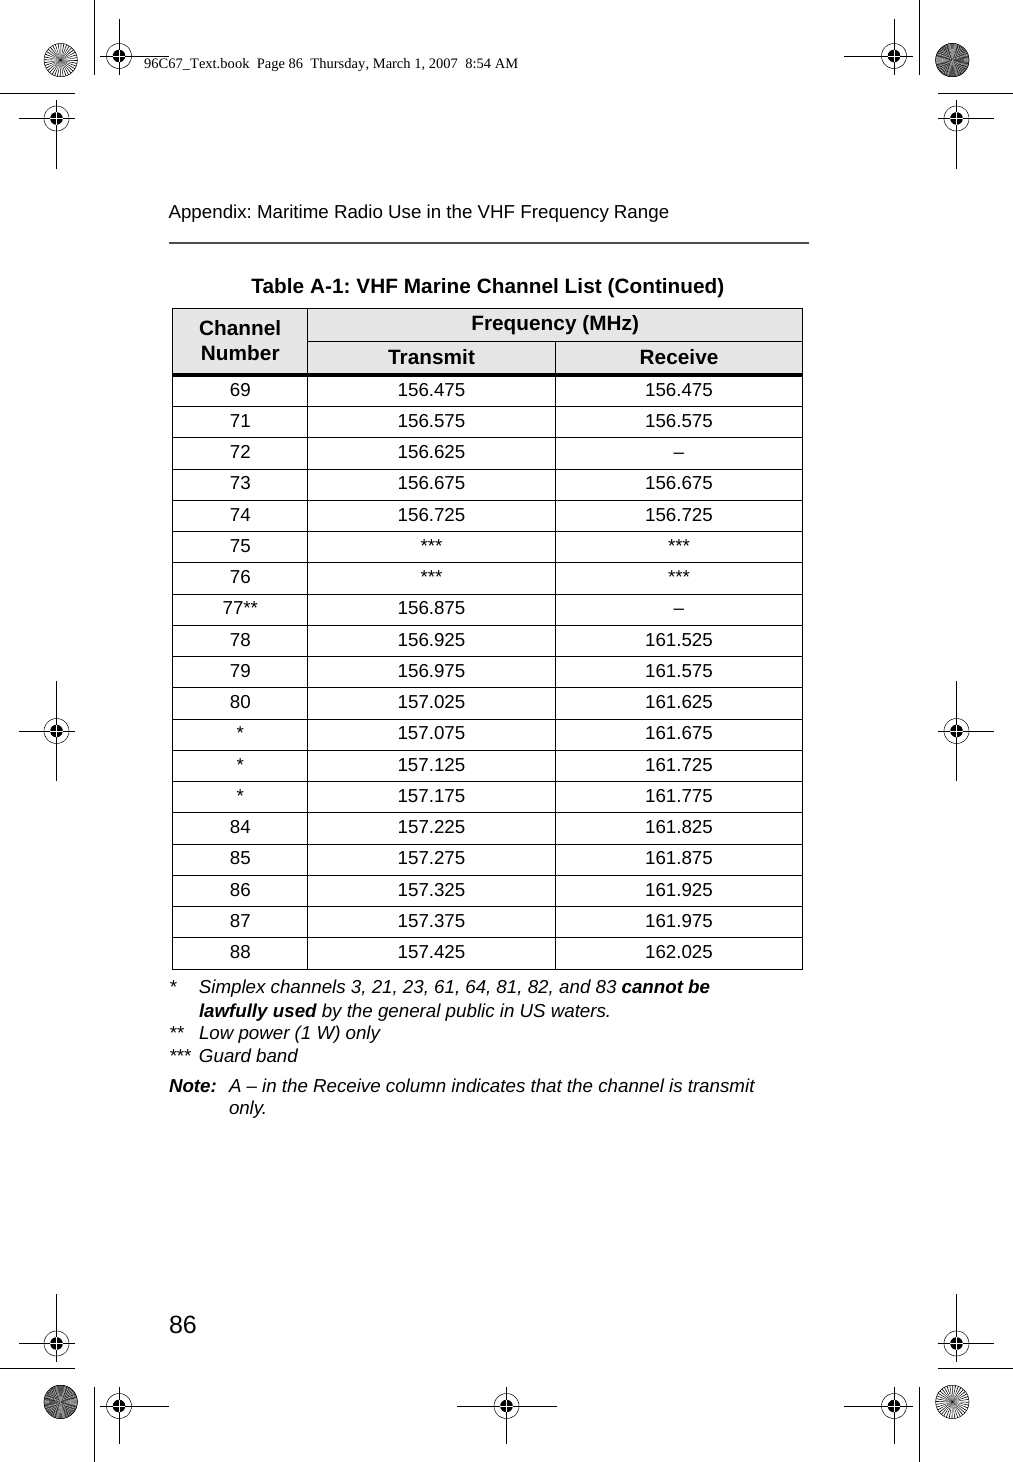 86Appendix: Maritime Radio Use in the VHF Frequency Range* Simplex channels 3, 21, 23, 61, 64, 81, 82, and 83 cannot be lawfully used by the general public in US waters.** Low power (1 W) only*** Guard bandNote: A – in the Receive column indicates that the channel is transmit only.69 156.475 156.47571 156.575 156.57572 156.625 –73 156.675 156.67574 156.725 156.72575 *** ***76 *** ***77** 156.875 –78 156.925 161.52579 156.975 161.57580 157.025 161.625* 157.075 161.675* 157.125 161.725* 157.175 161.77584 157.225 161.82585 157.275 161.87586 157.325 161.92587 157.375 161.97588 157.425 162.025Table A-1: VHF Marine Channel List (Continued)Channel NumberFrequency (MHz)Transmit Receive96C67_Text.book  Page 86  Thursday, March 1, 2007  8:54 AM